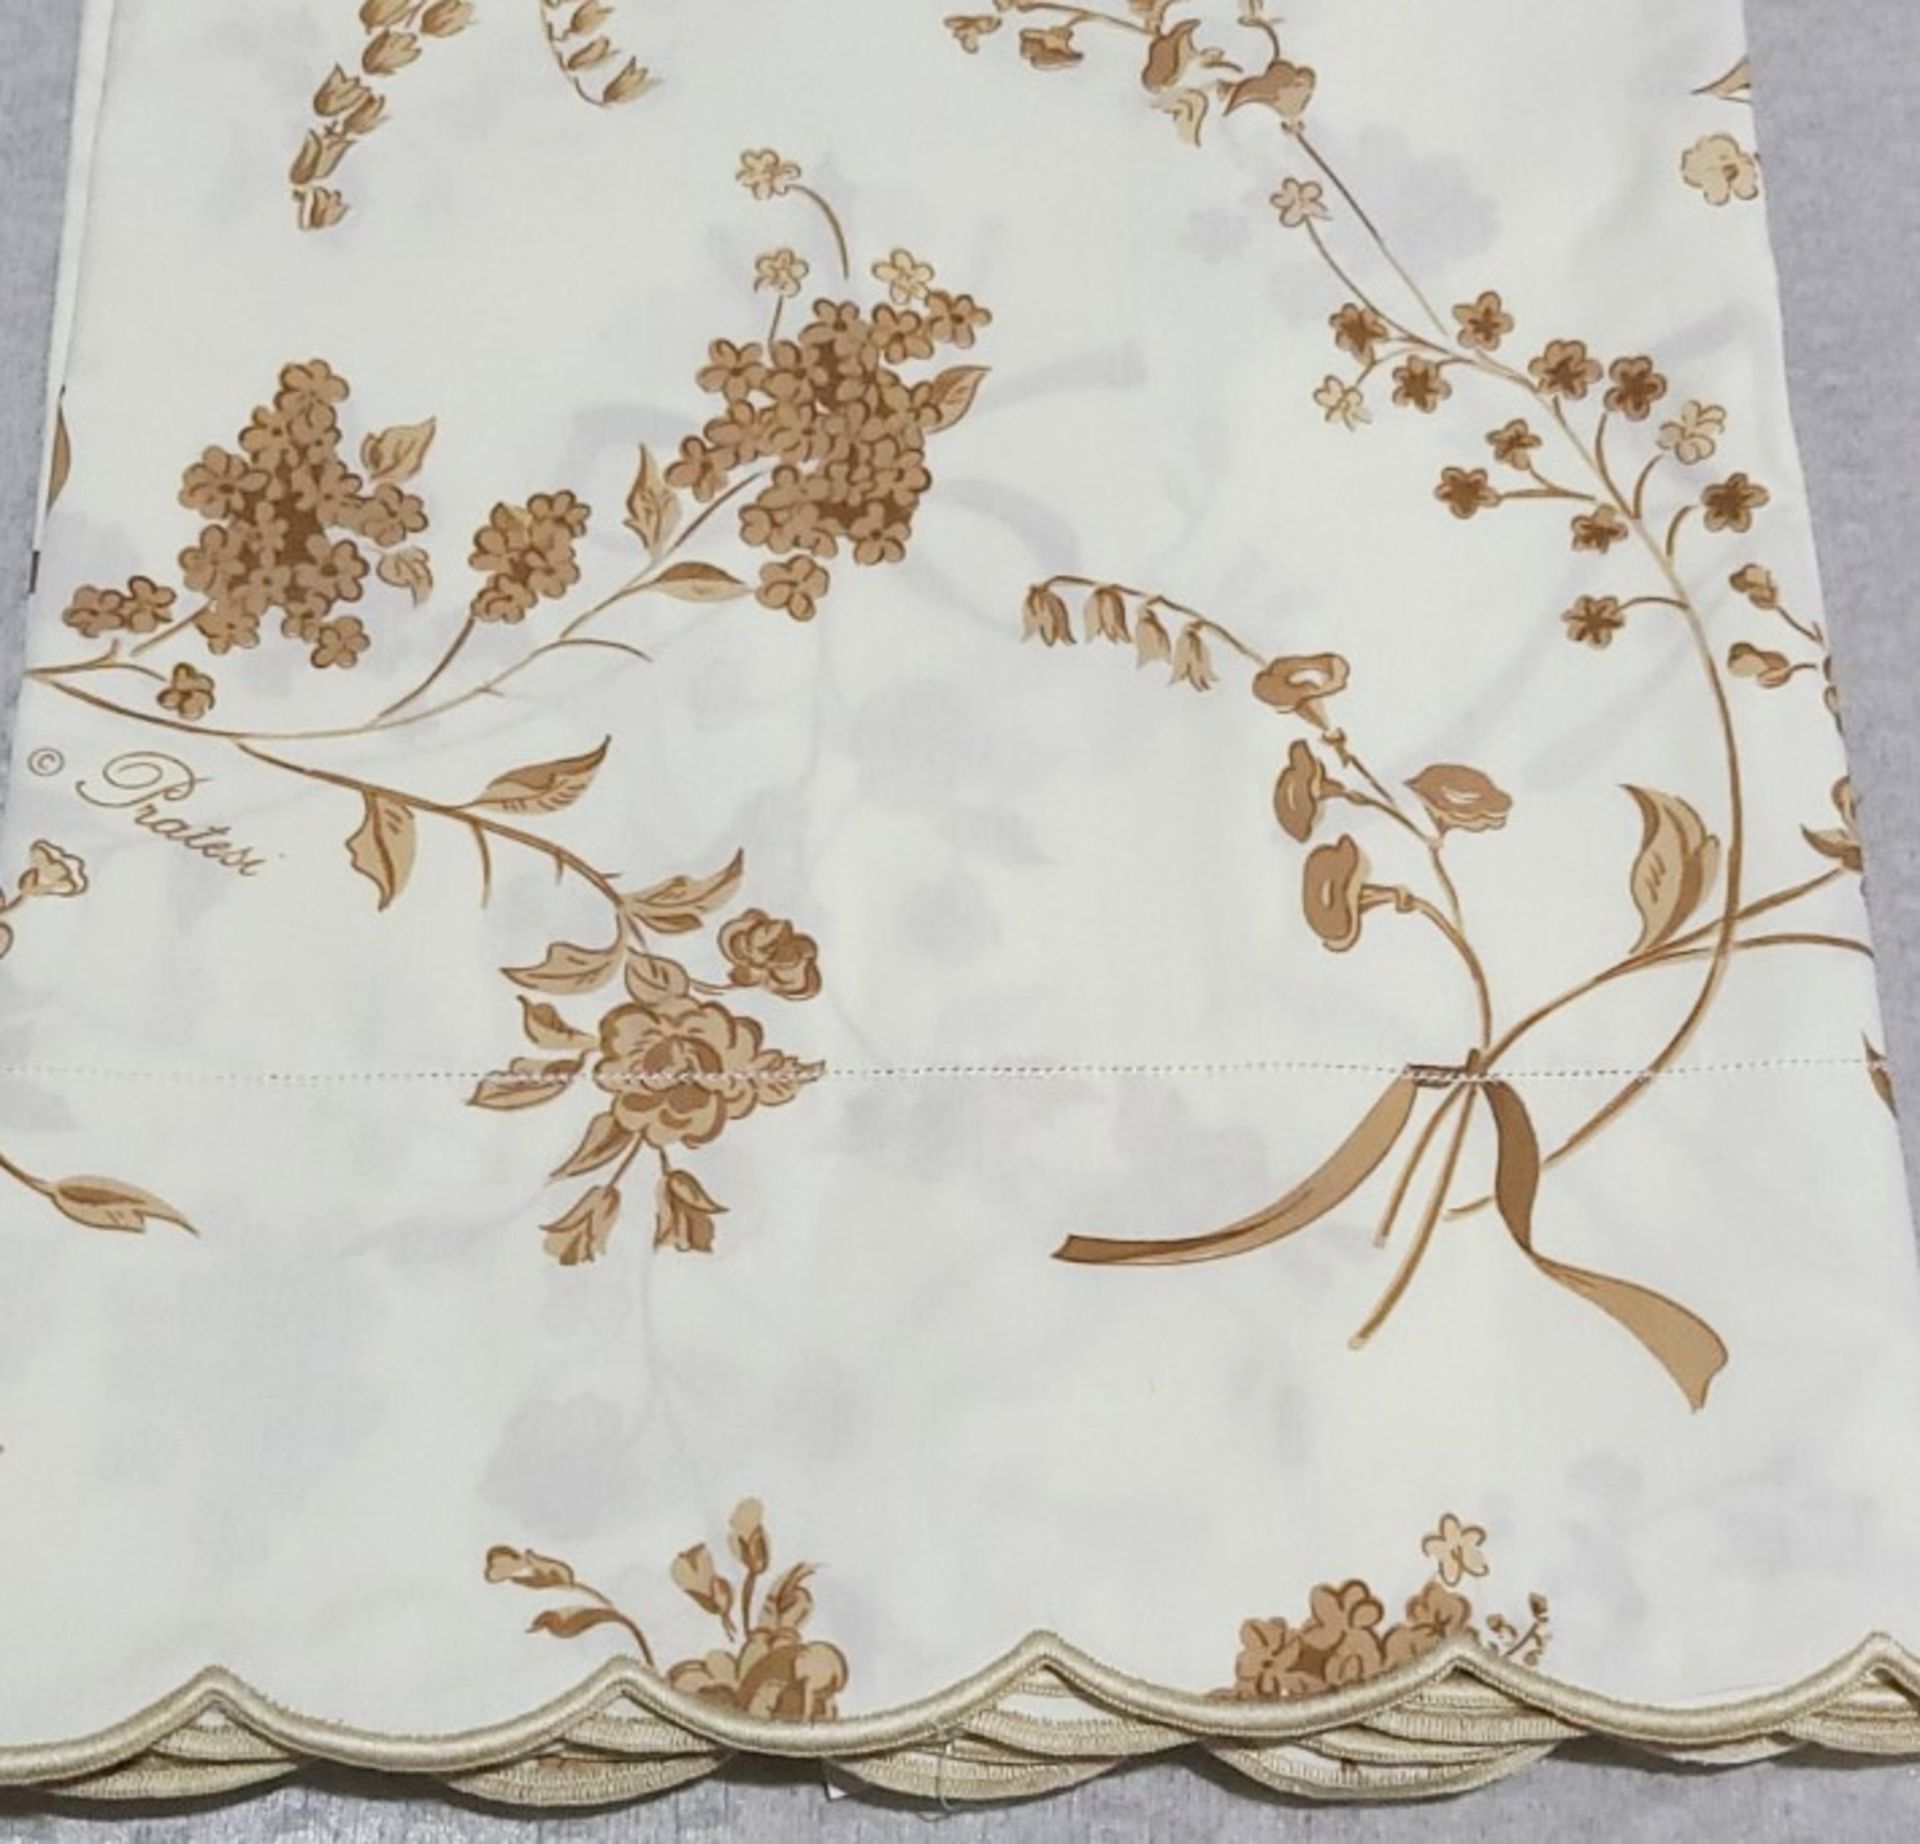 Set Of 2 x PRATESI Brown Floral Ribbon Print with Scallop Hem In Gold Off White Sham 50x75cmn - Image 4 of 5